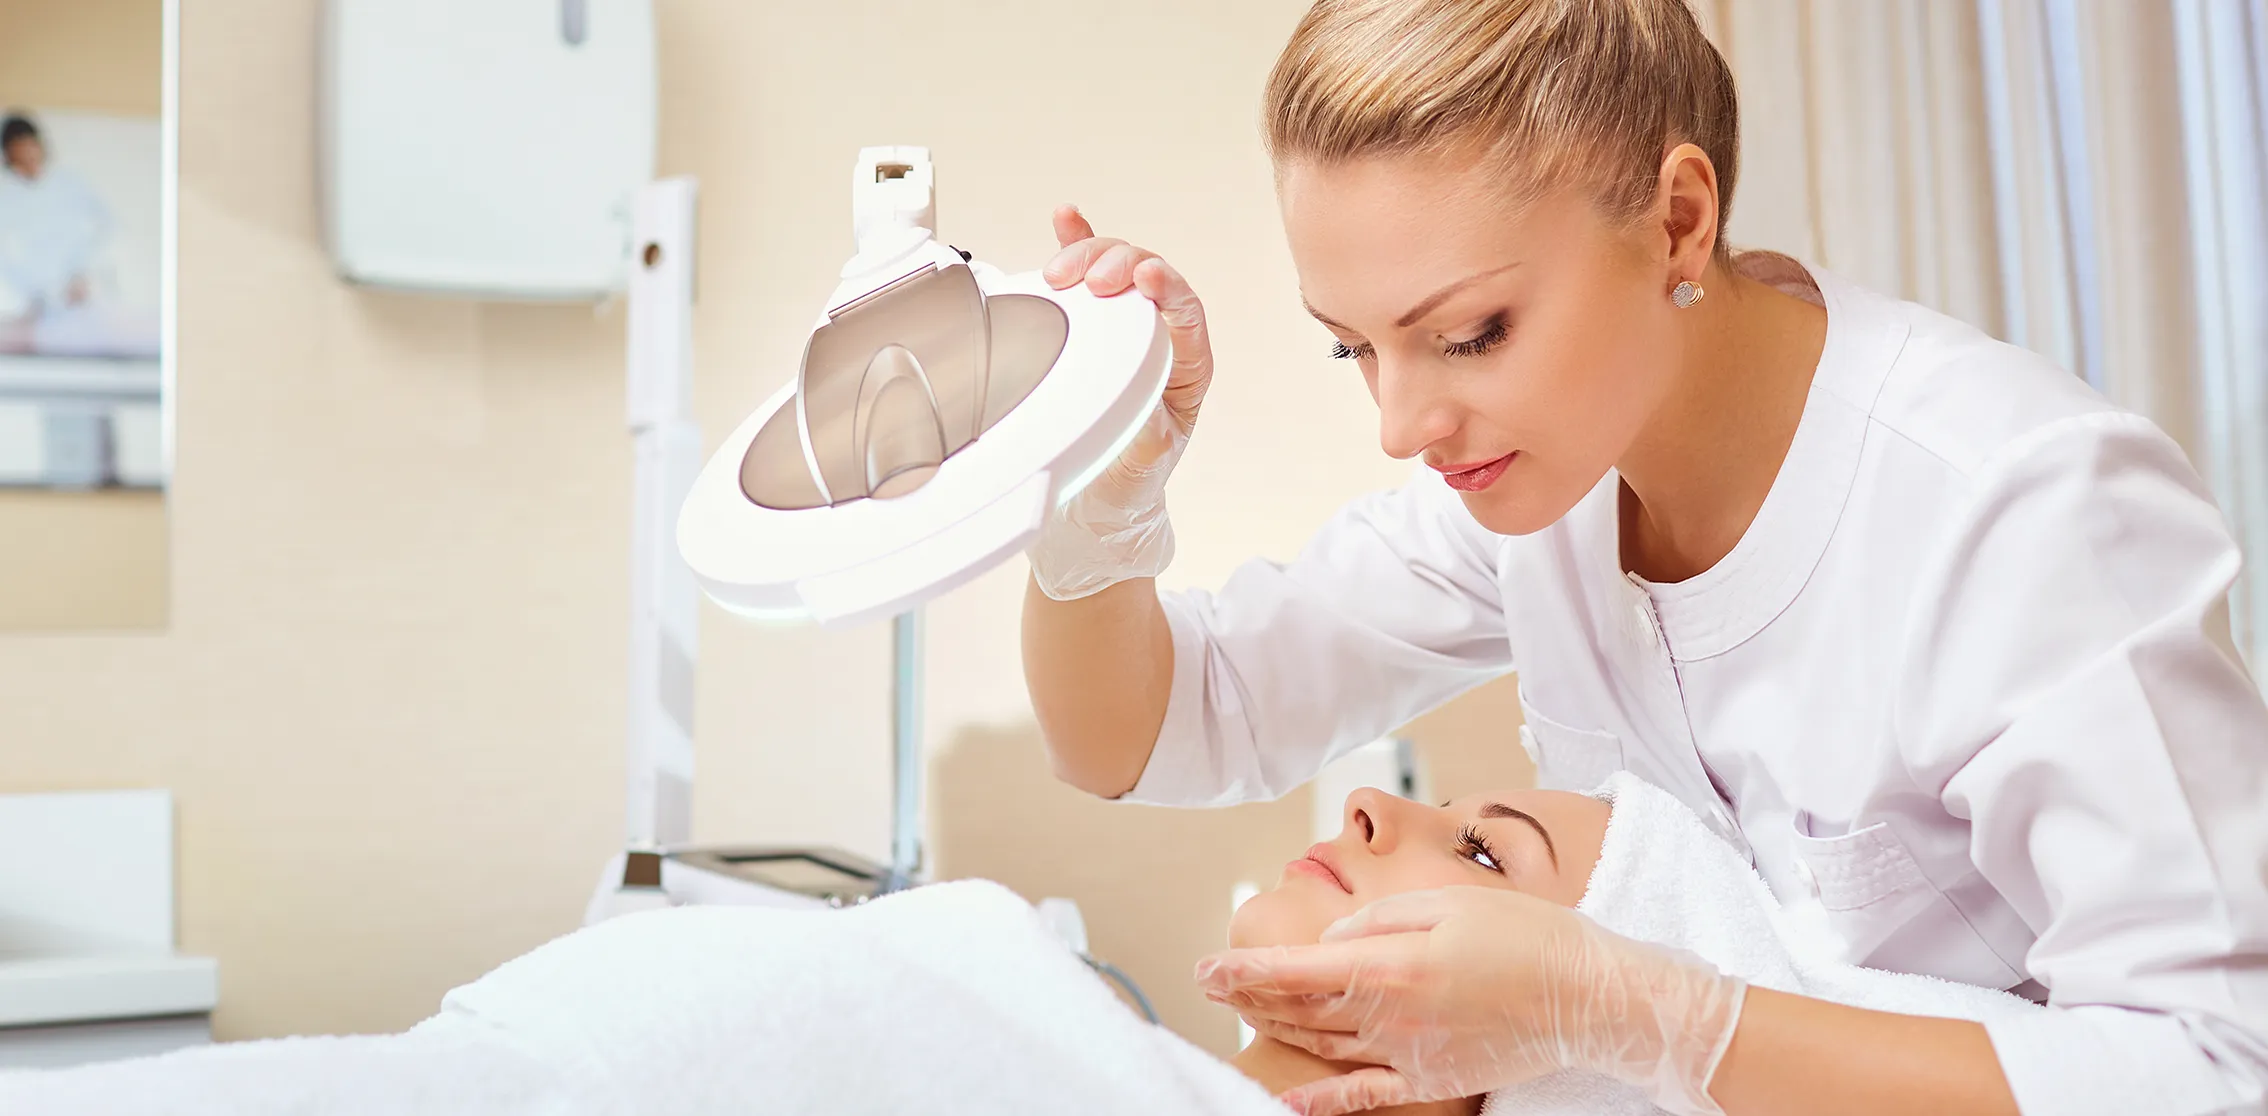 facial treatments at the Skincare Centre